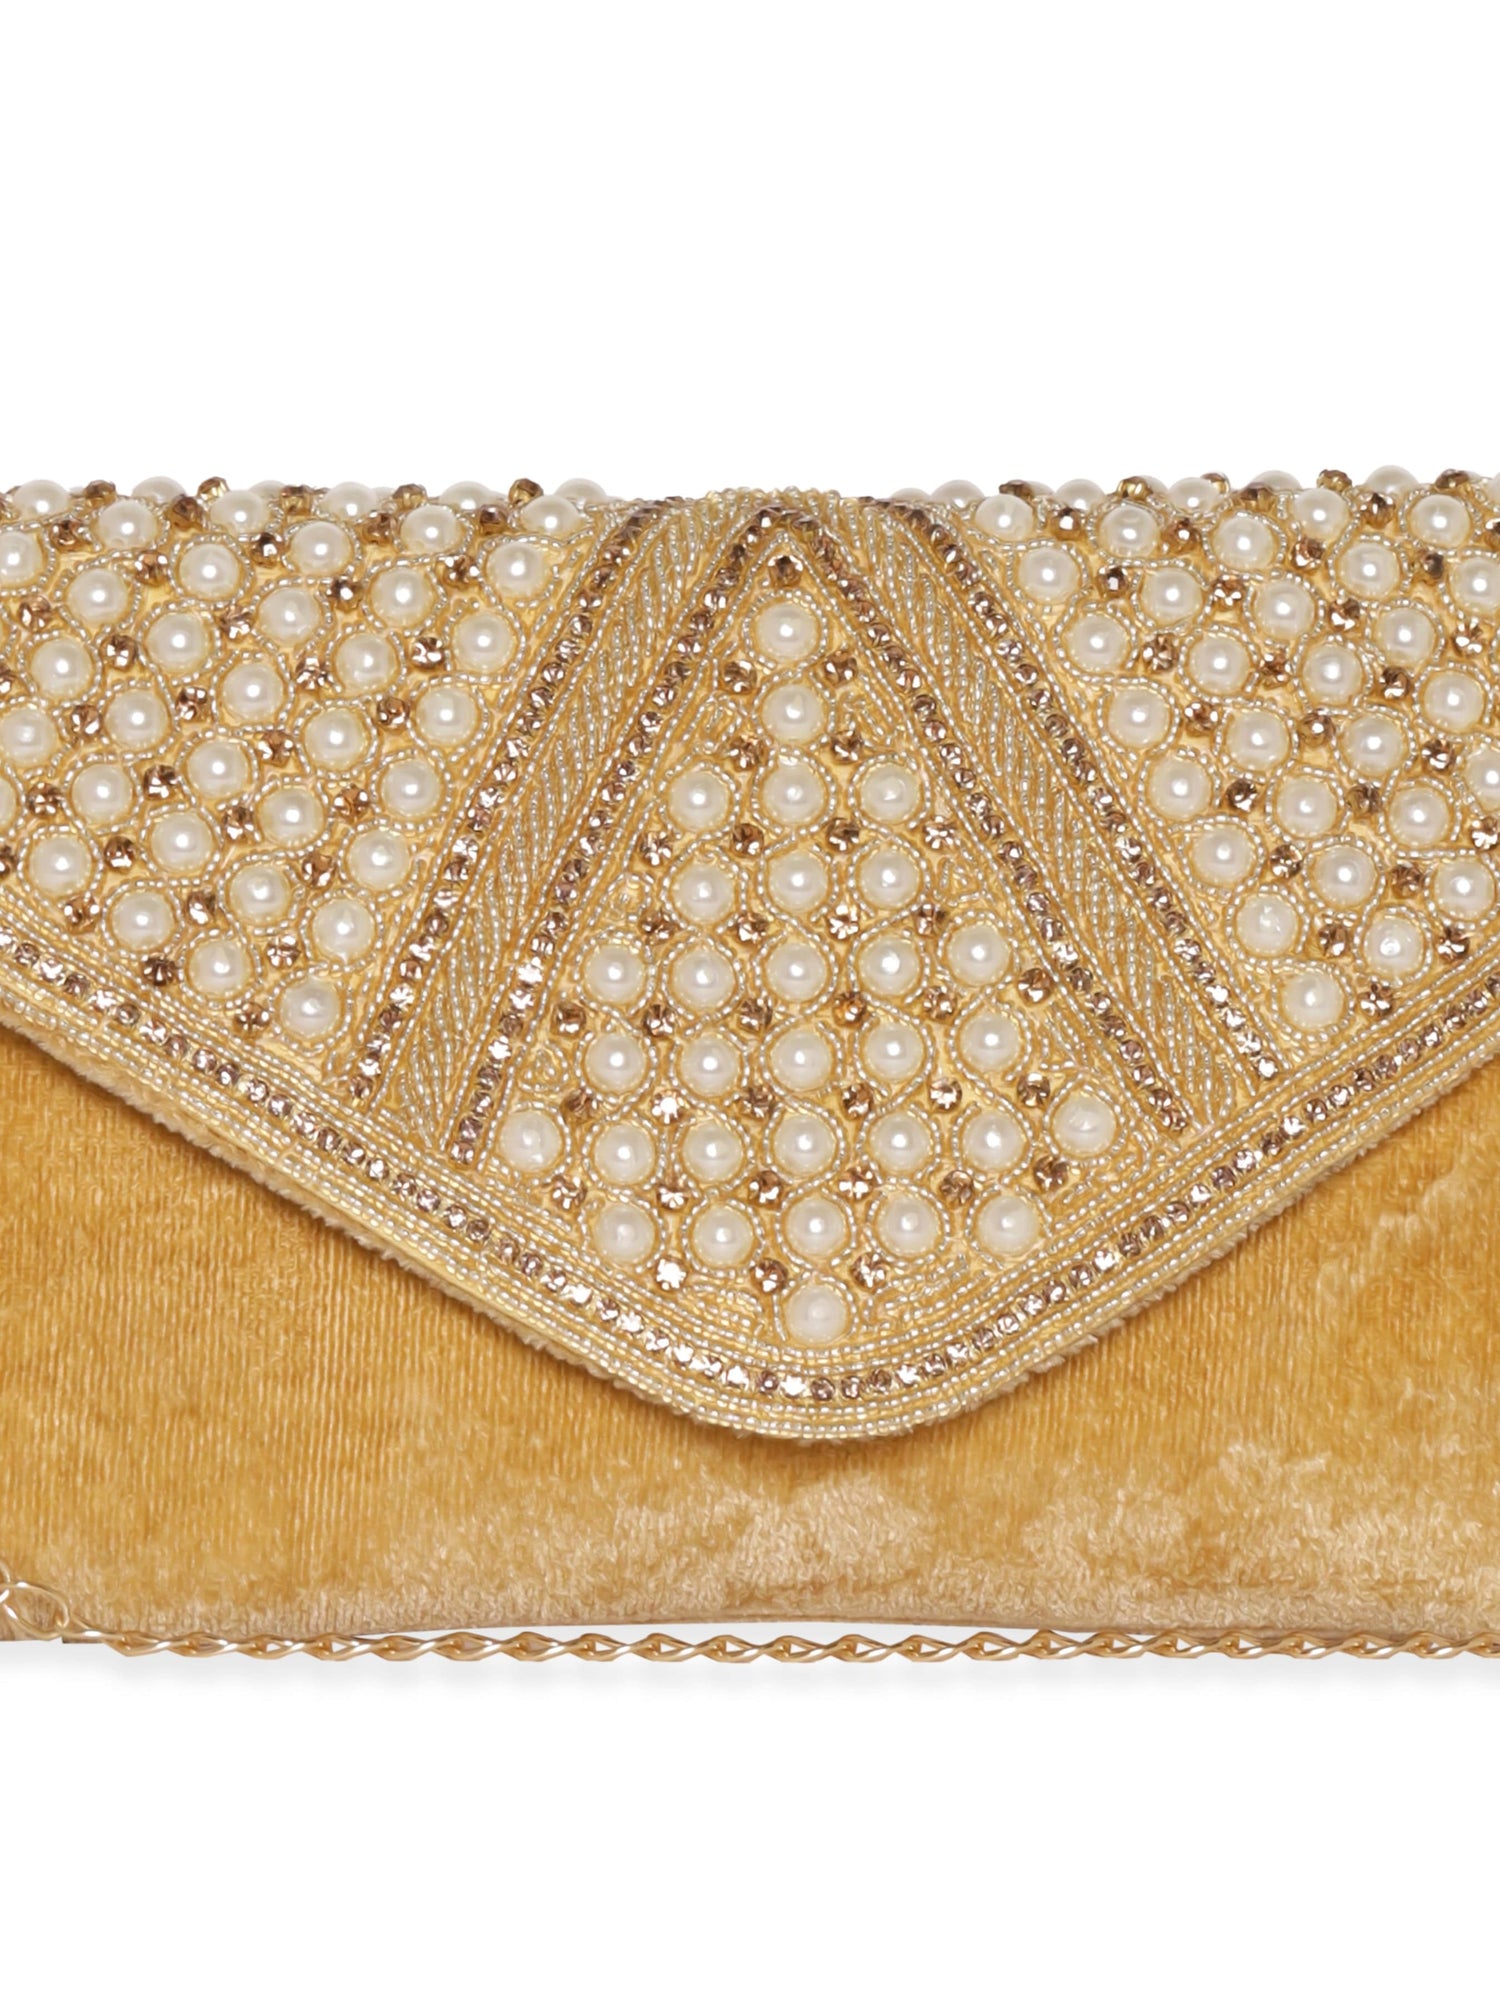 Rubans Beige Clutch with Stone and Pearl Embellishment Handbag, Wallet Accessories &amp; Clutches